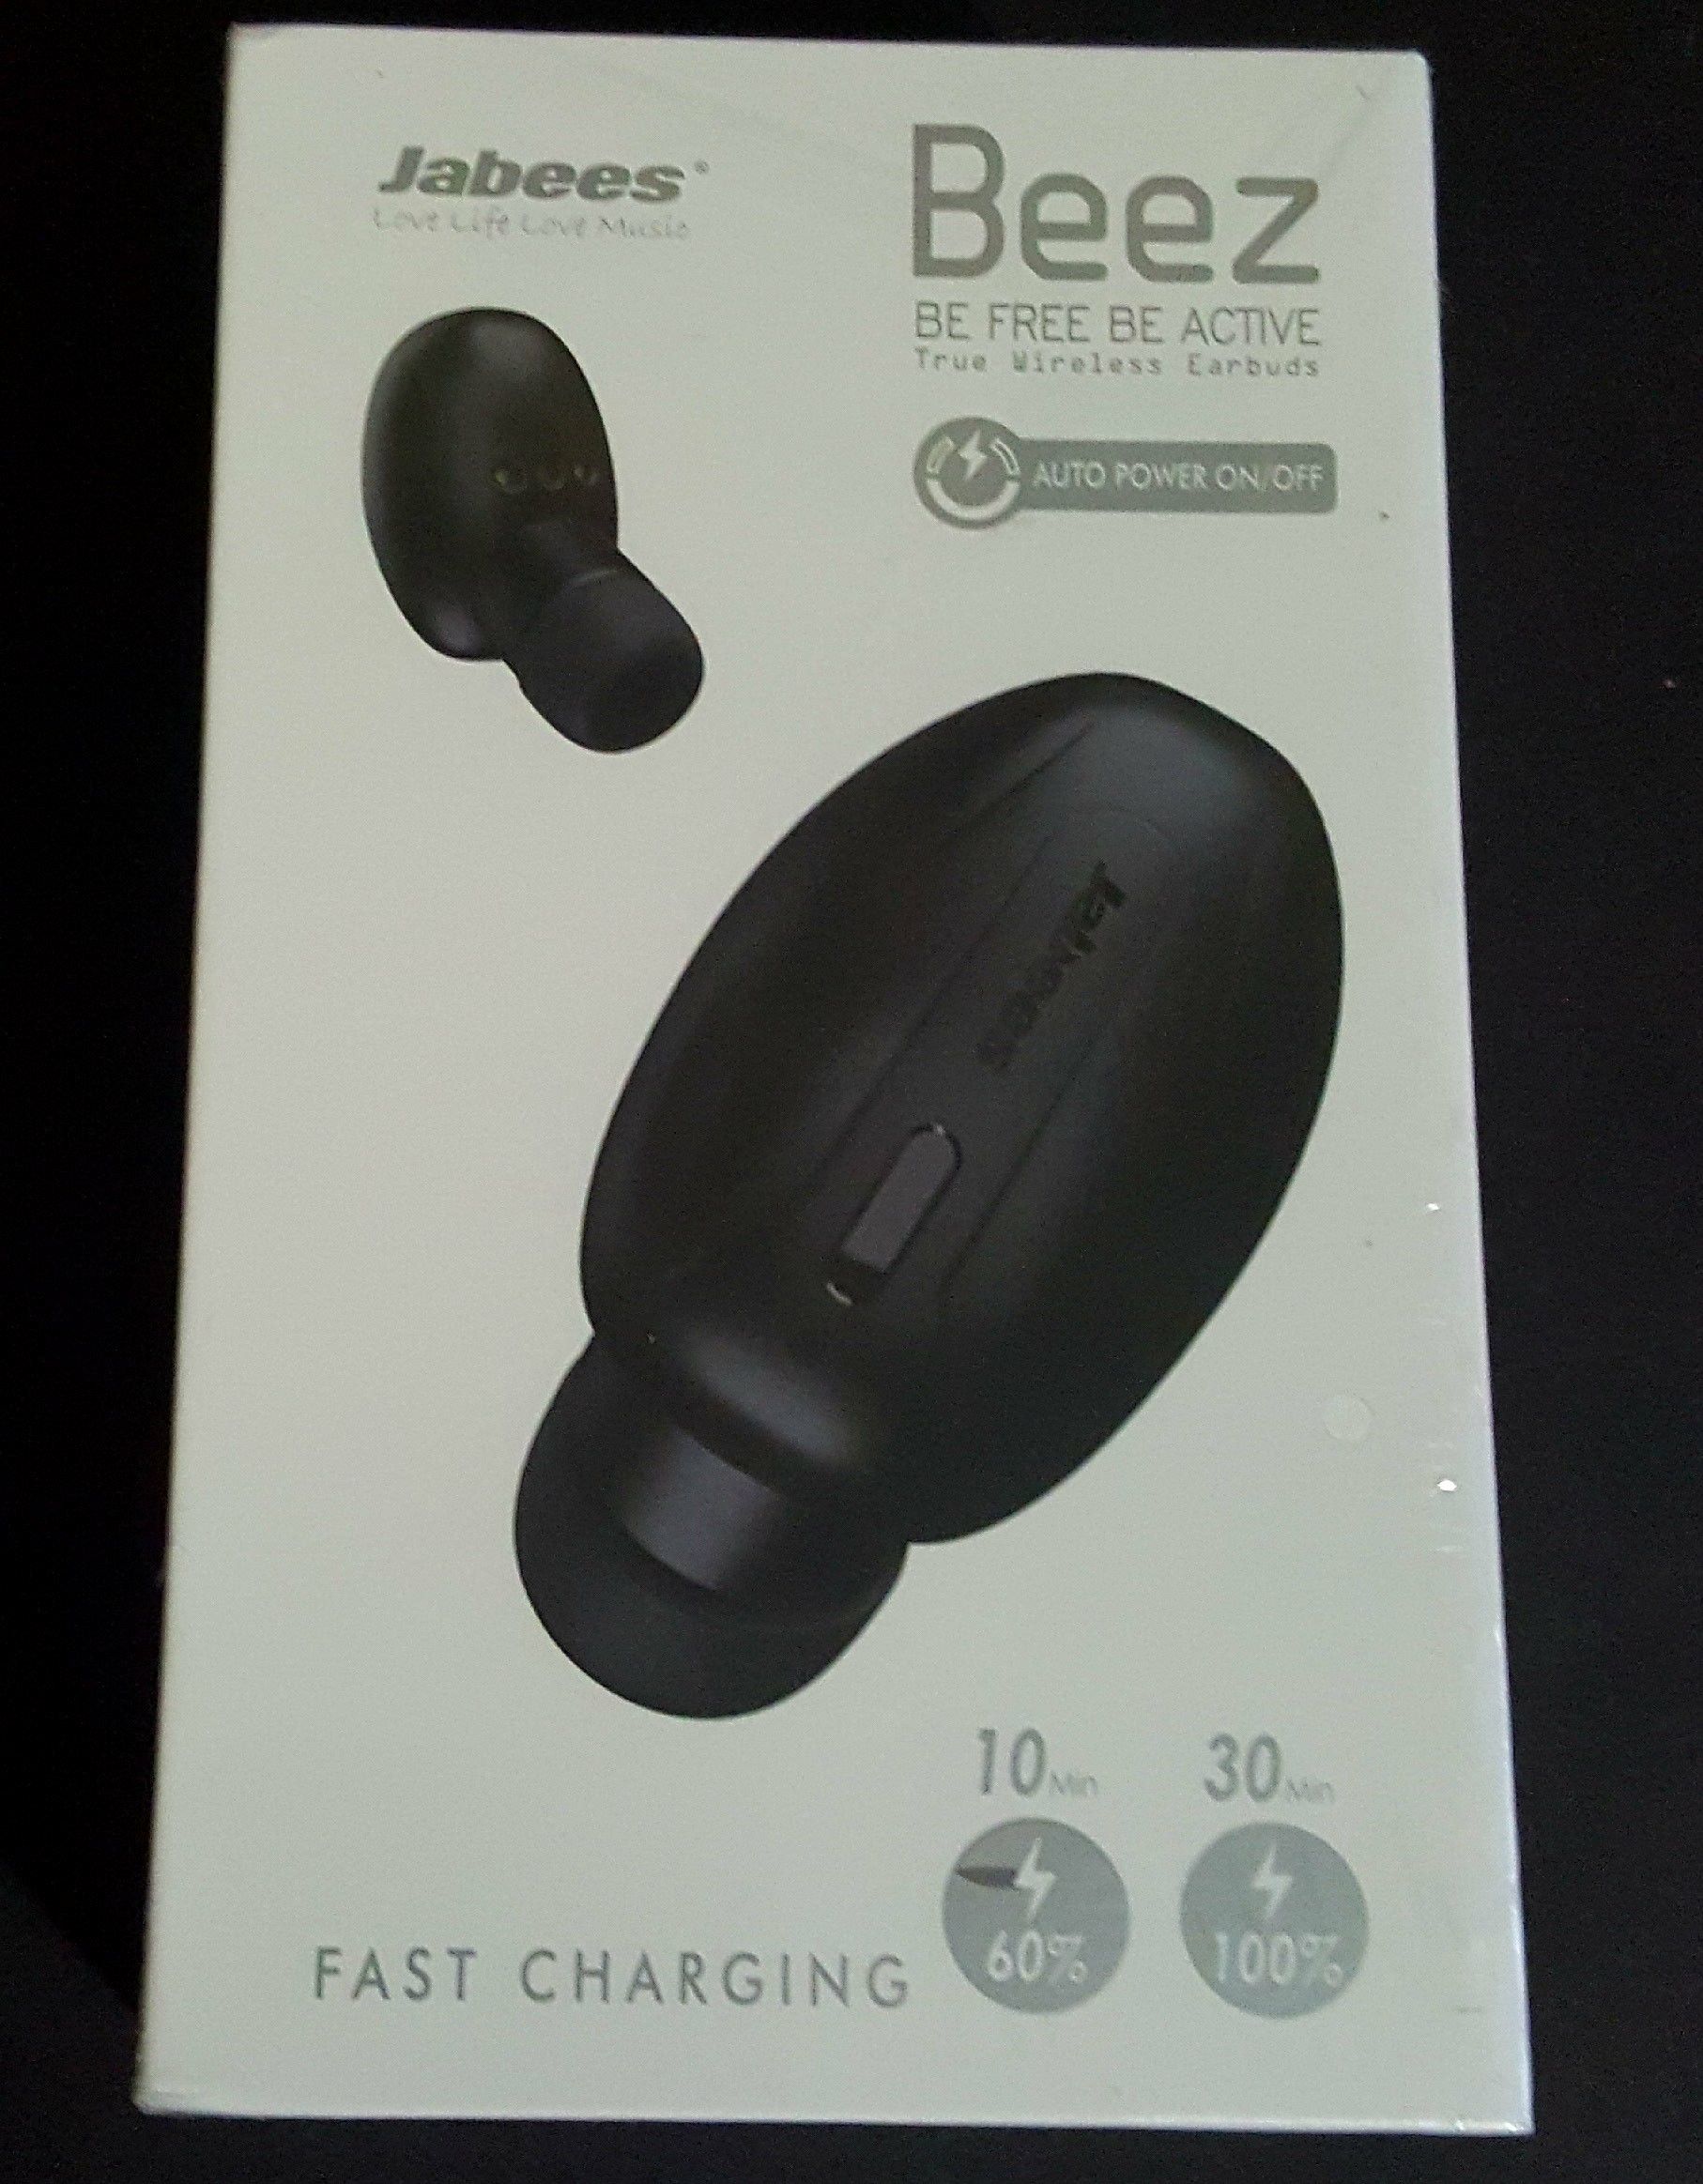 True wireless Bluetooth earbuds For Apple and Android devices.